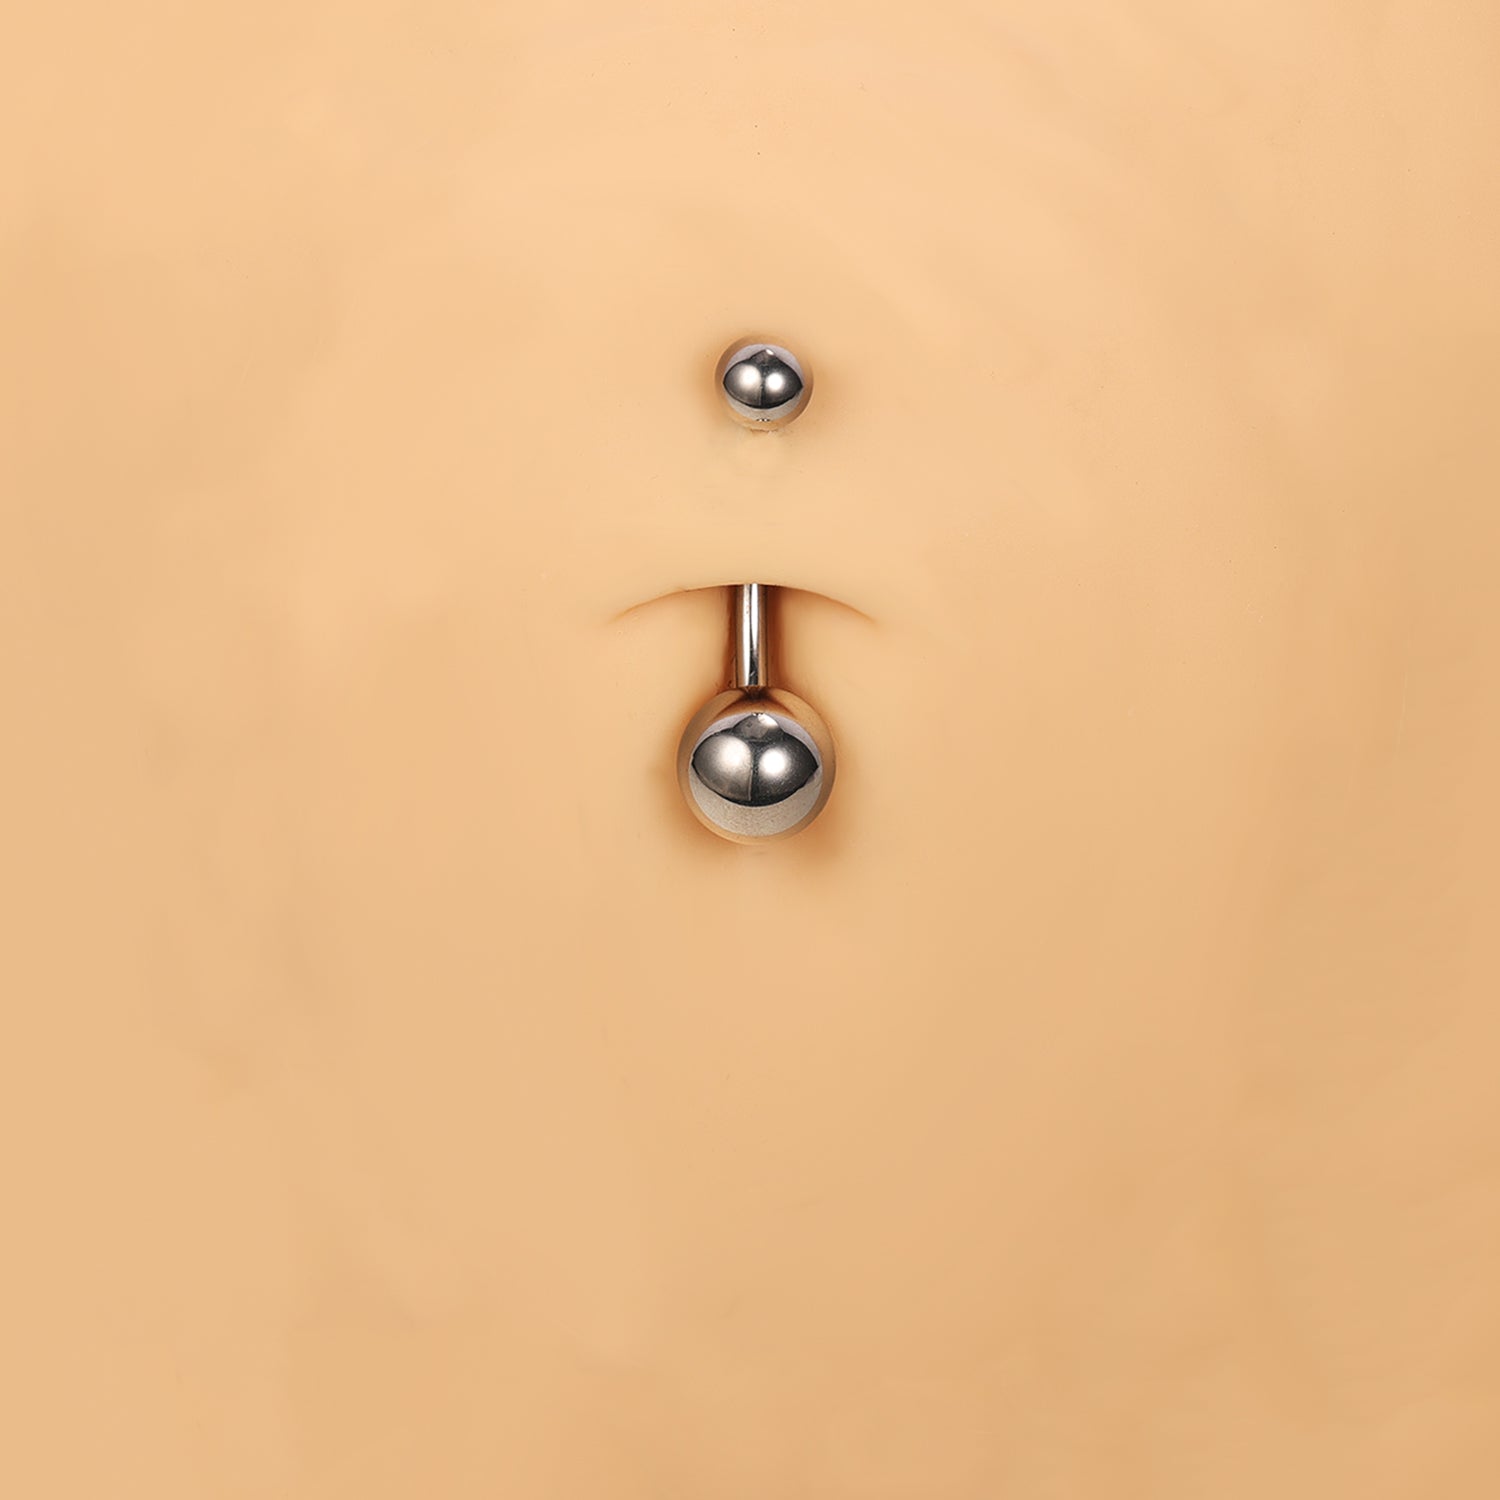 14G Stainless Steel Belly Navel Rings Internal Thread Belly Button Rings Barbell Jewelry